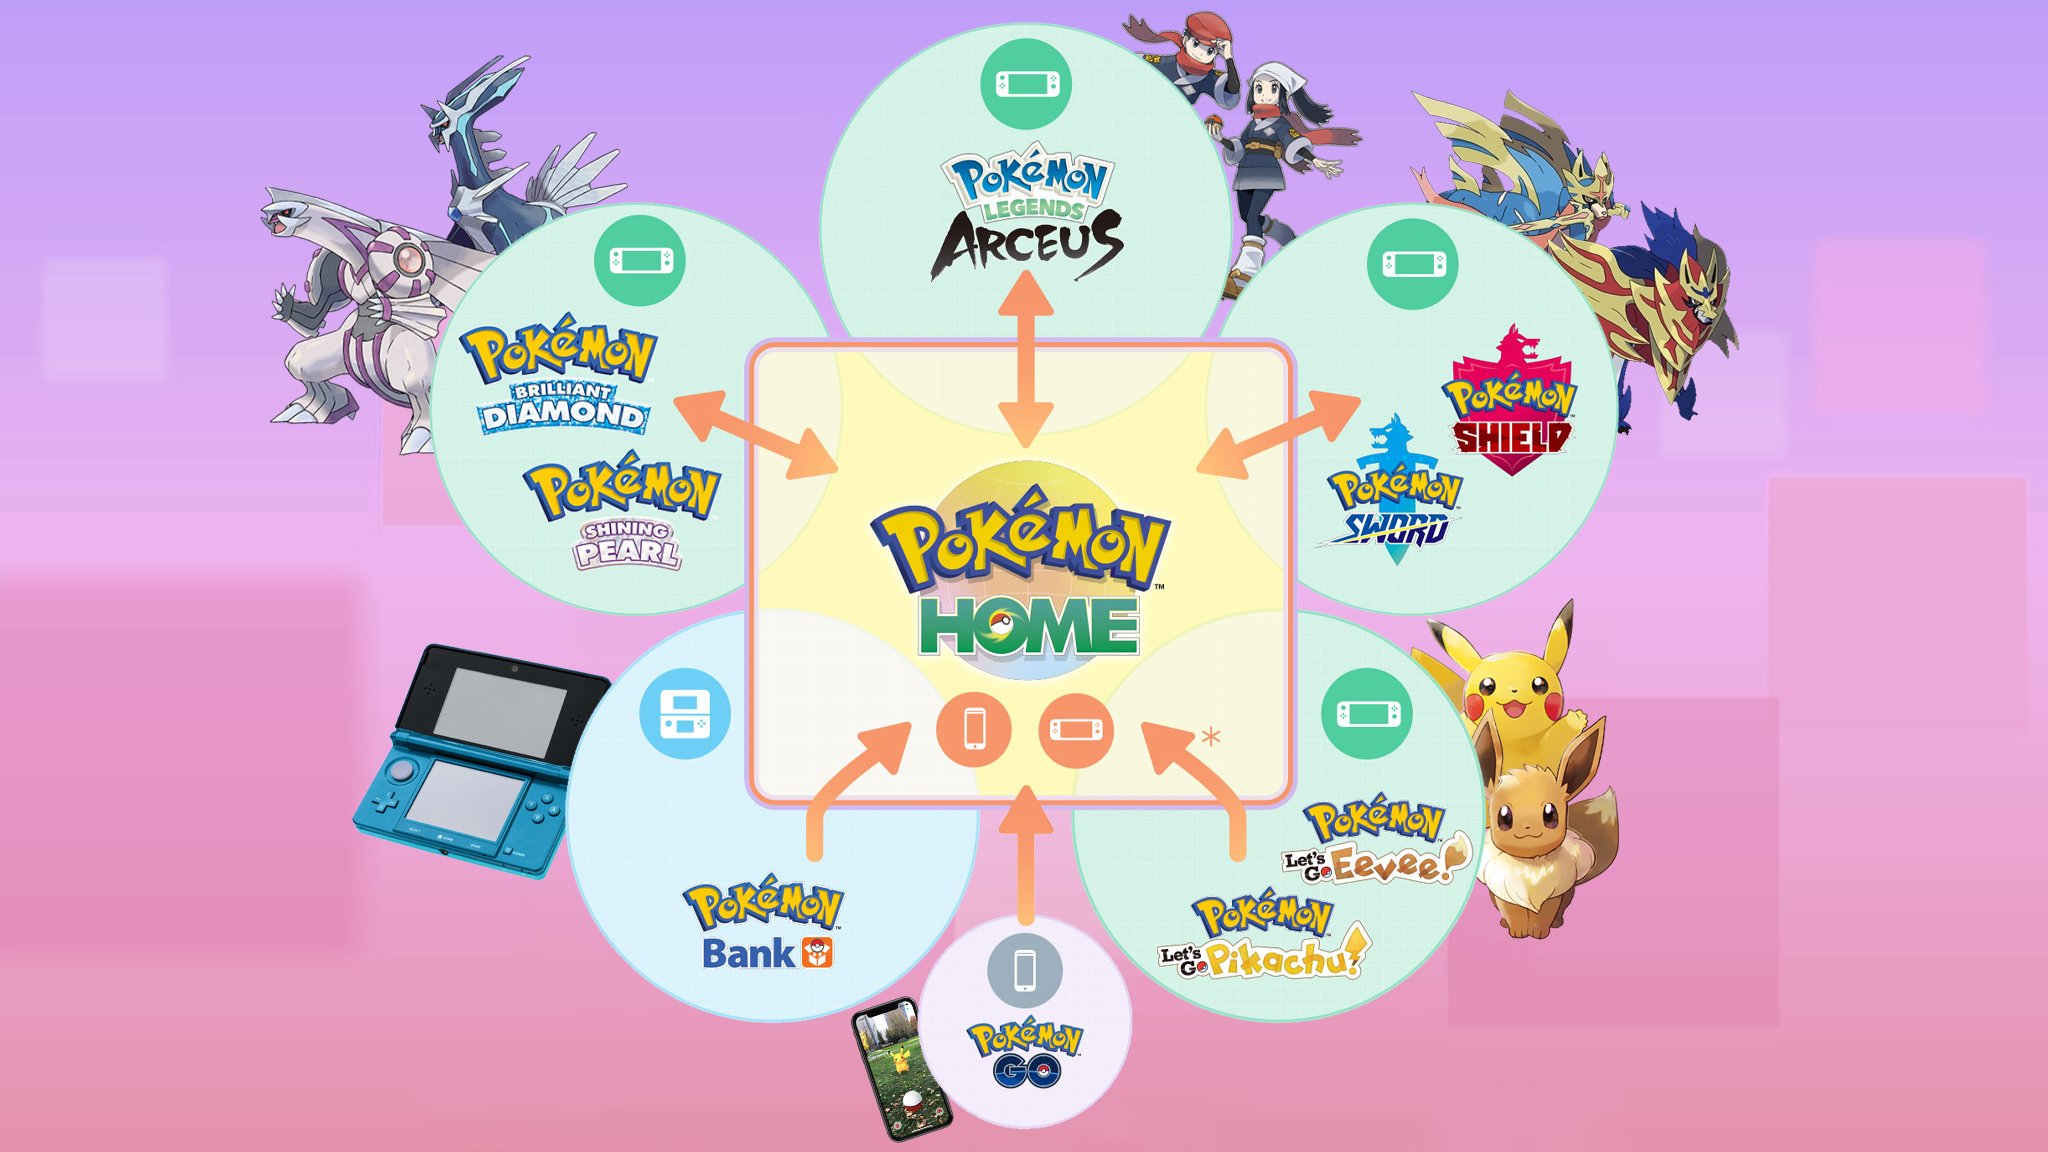 GamerCityNews pokemon-home-diagram-legends-arceus-bdsp-added-characters Nintendo gaming recap: Switch financial reports and tons of Pokémon news 